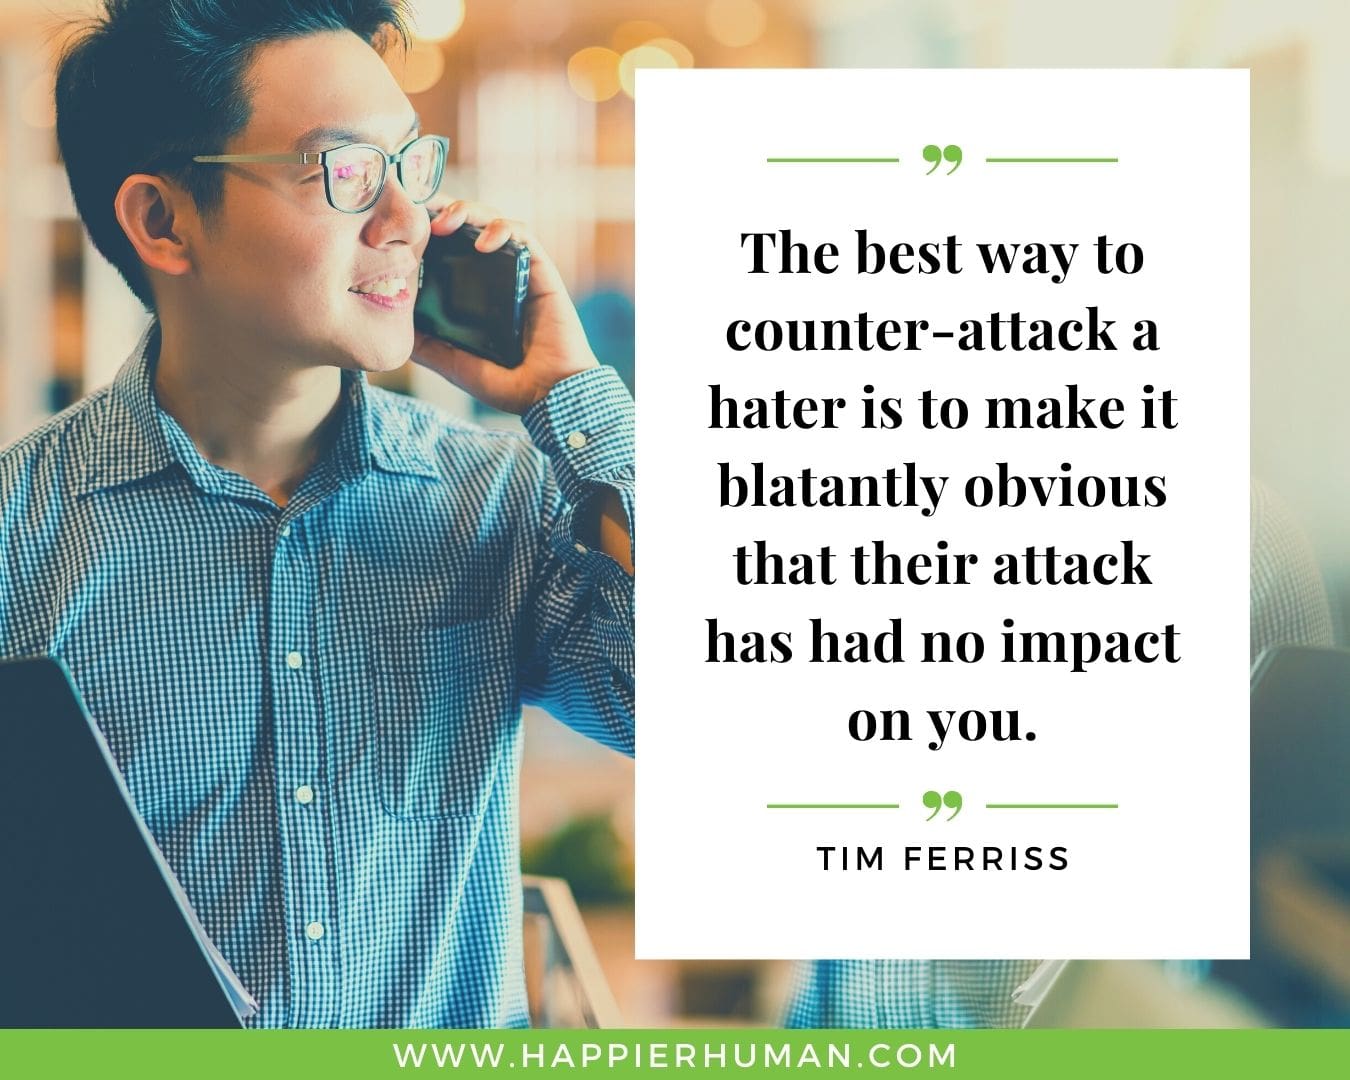 Haters Quotes - “The best way to counter-attack a hater is to make it blatantly obvious that their attack has had no impact on you.” - Tim Ferriss